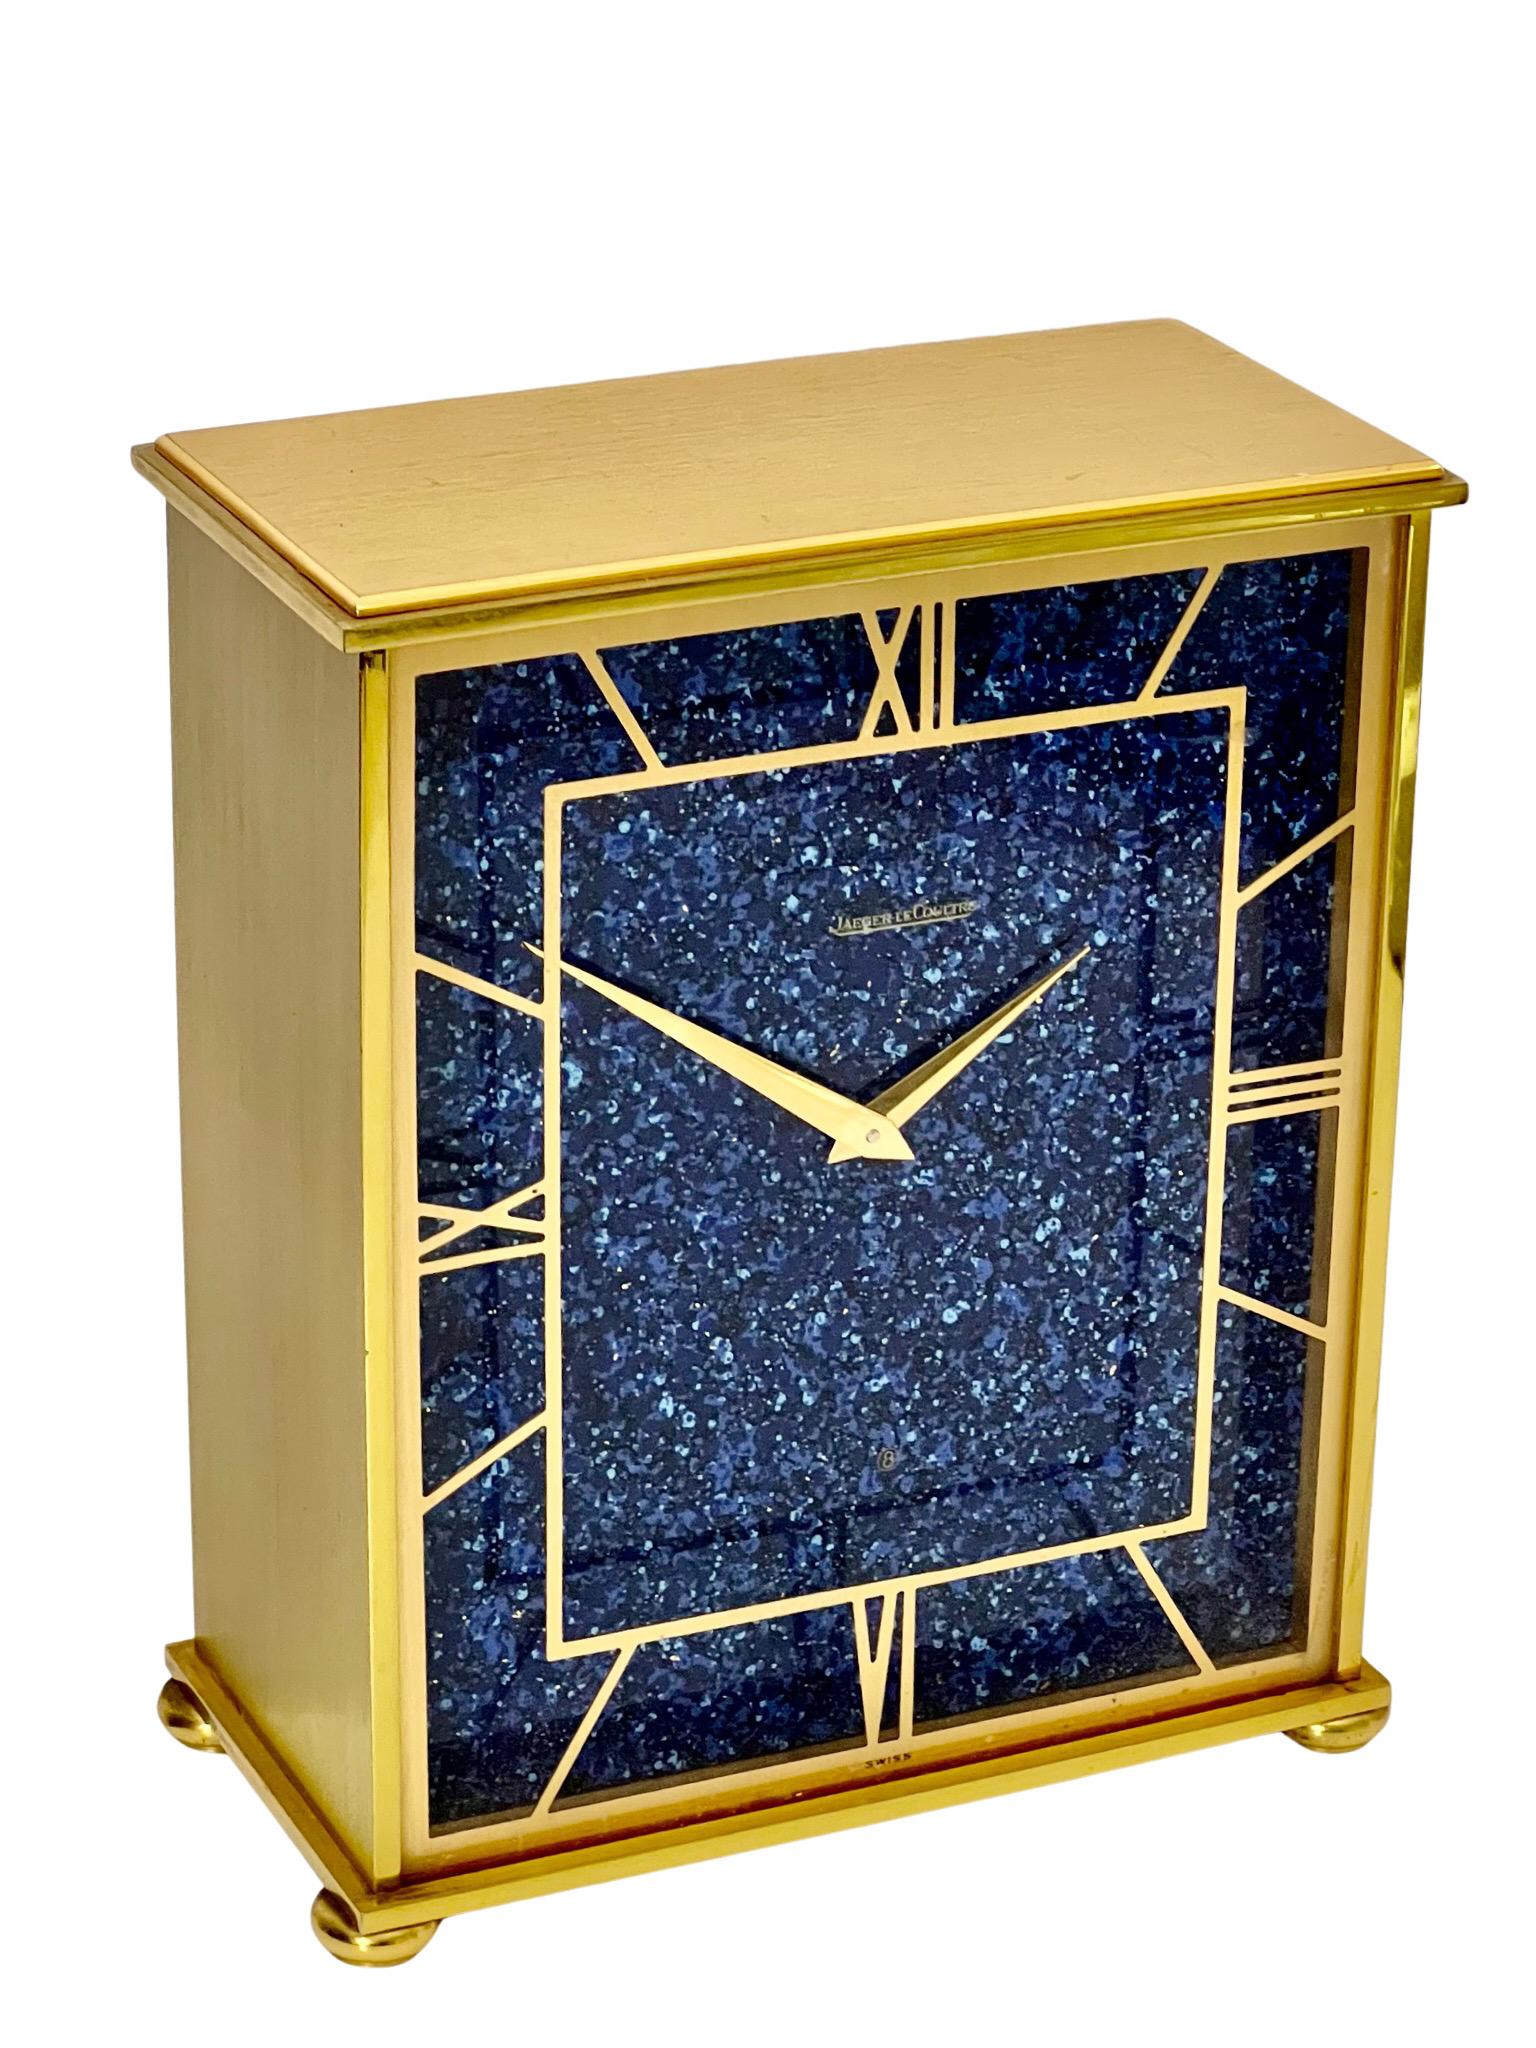 A beautiful mid century gold plated eight day timepiece mantel clock made by Jaeger LeCoultre, La Chaux-de-Fons, Switzerland.

Mid century clocks make stunning statements in your home. They blend extremely well with any décor and are very in